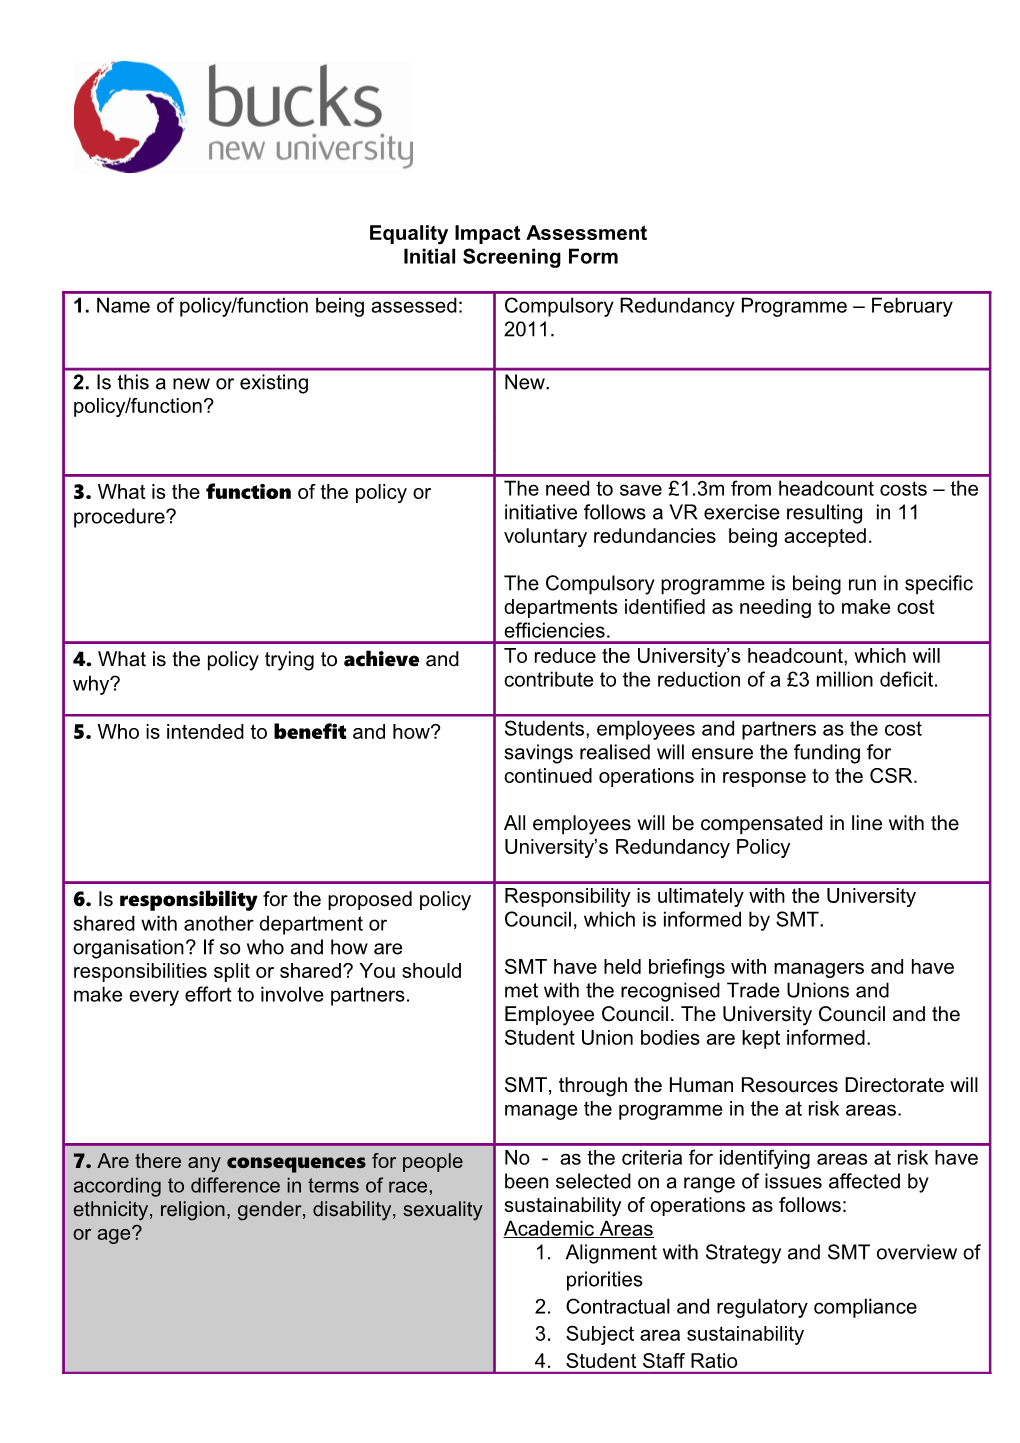 Equality Impact Assessment Initial Screening Form